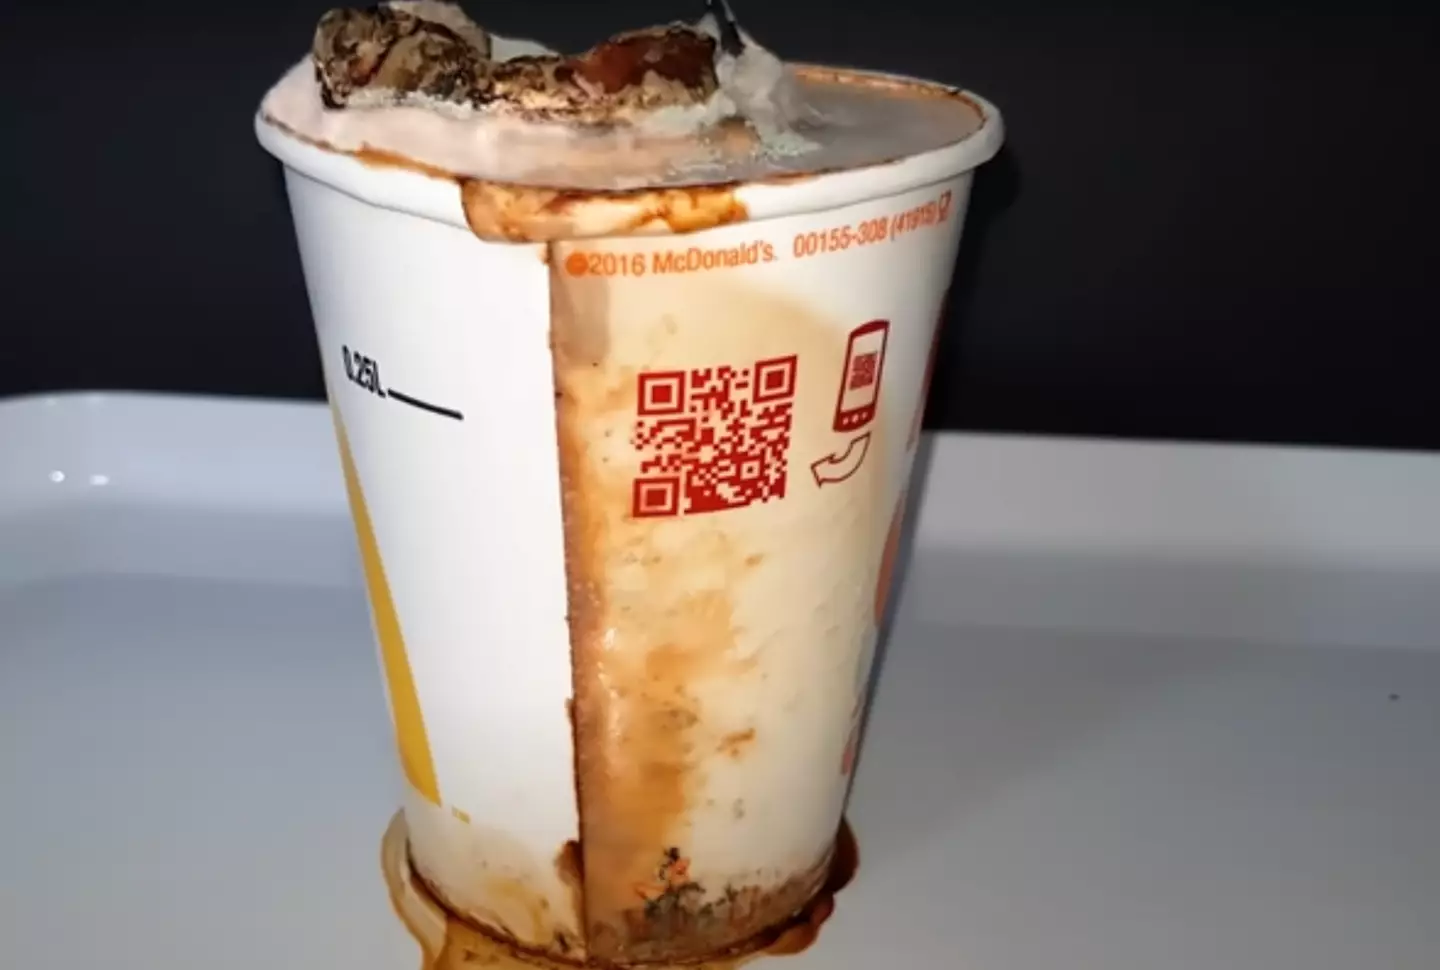 Explaining the experiment, the video caption read: “Have you ever wondered how long could McDonald's paper cup hold your drink? Me too."(PhotoOwl via YouTube)